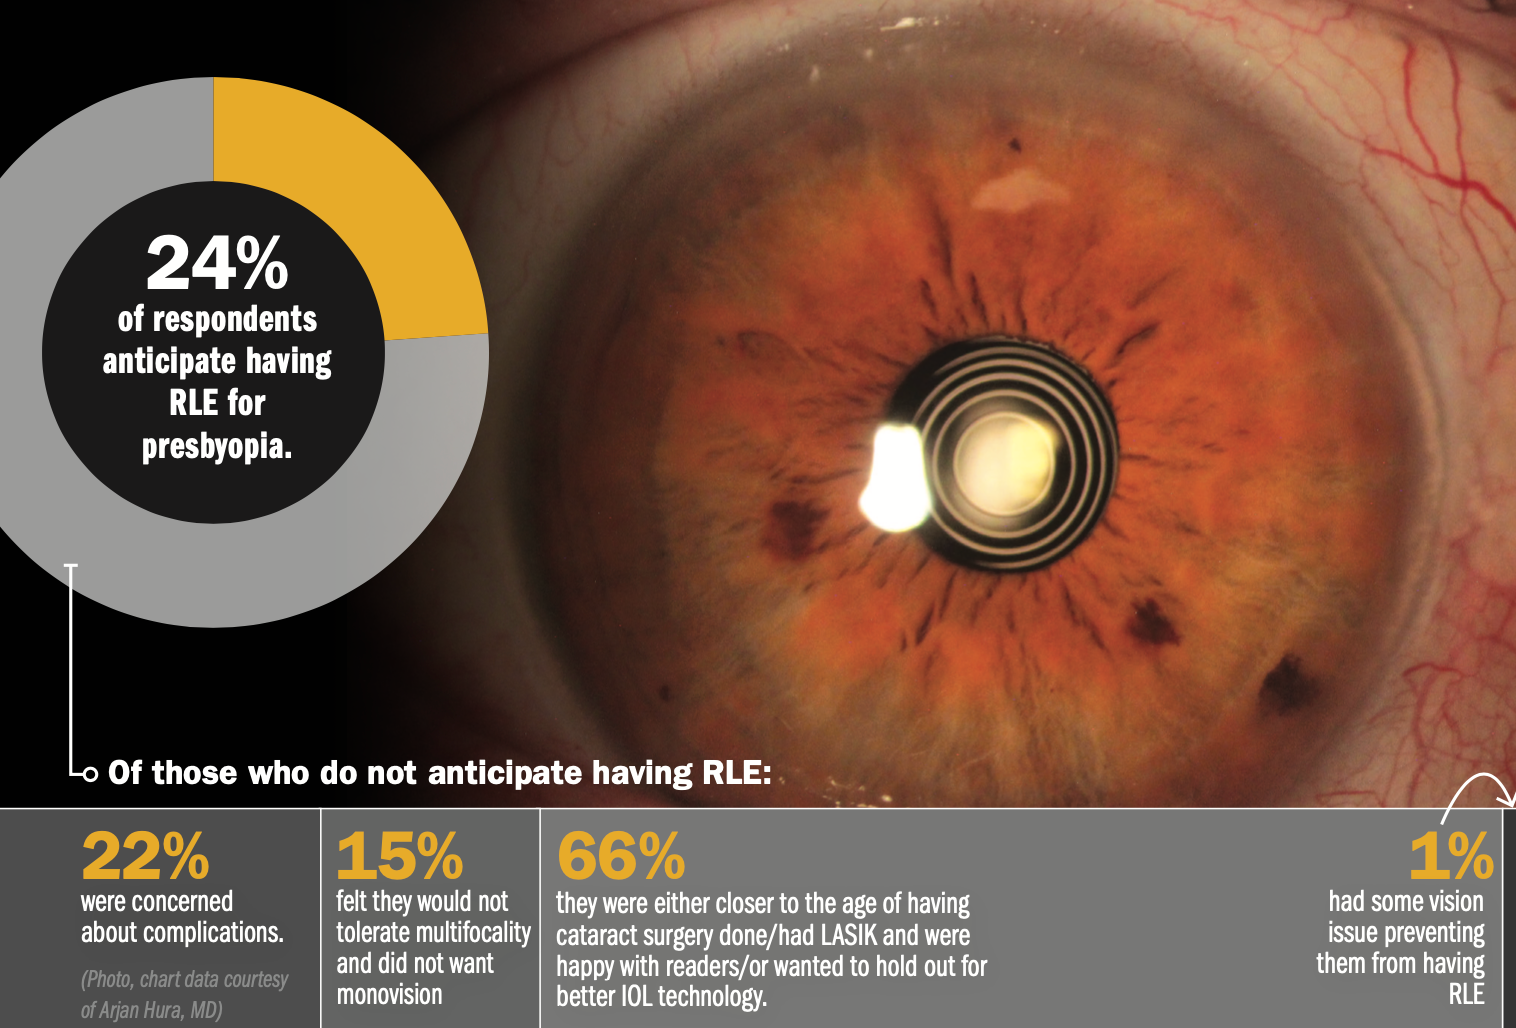 Dispelling myths about refractive lens exchange